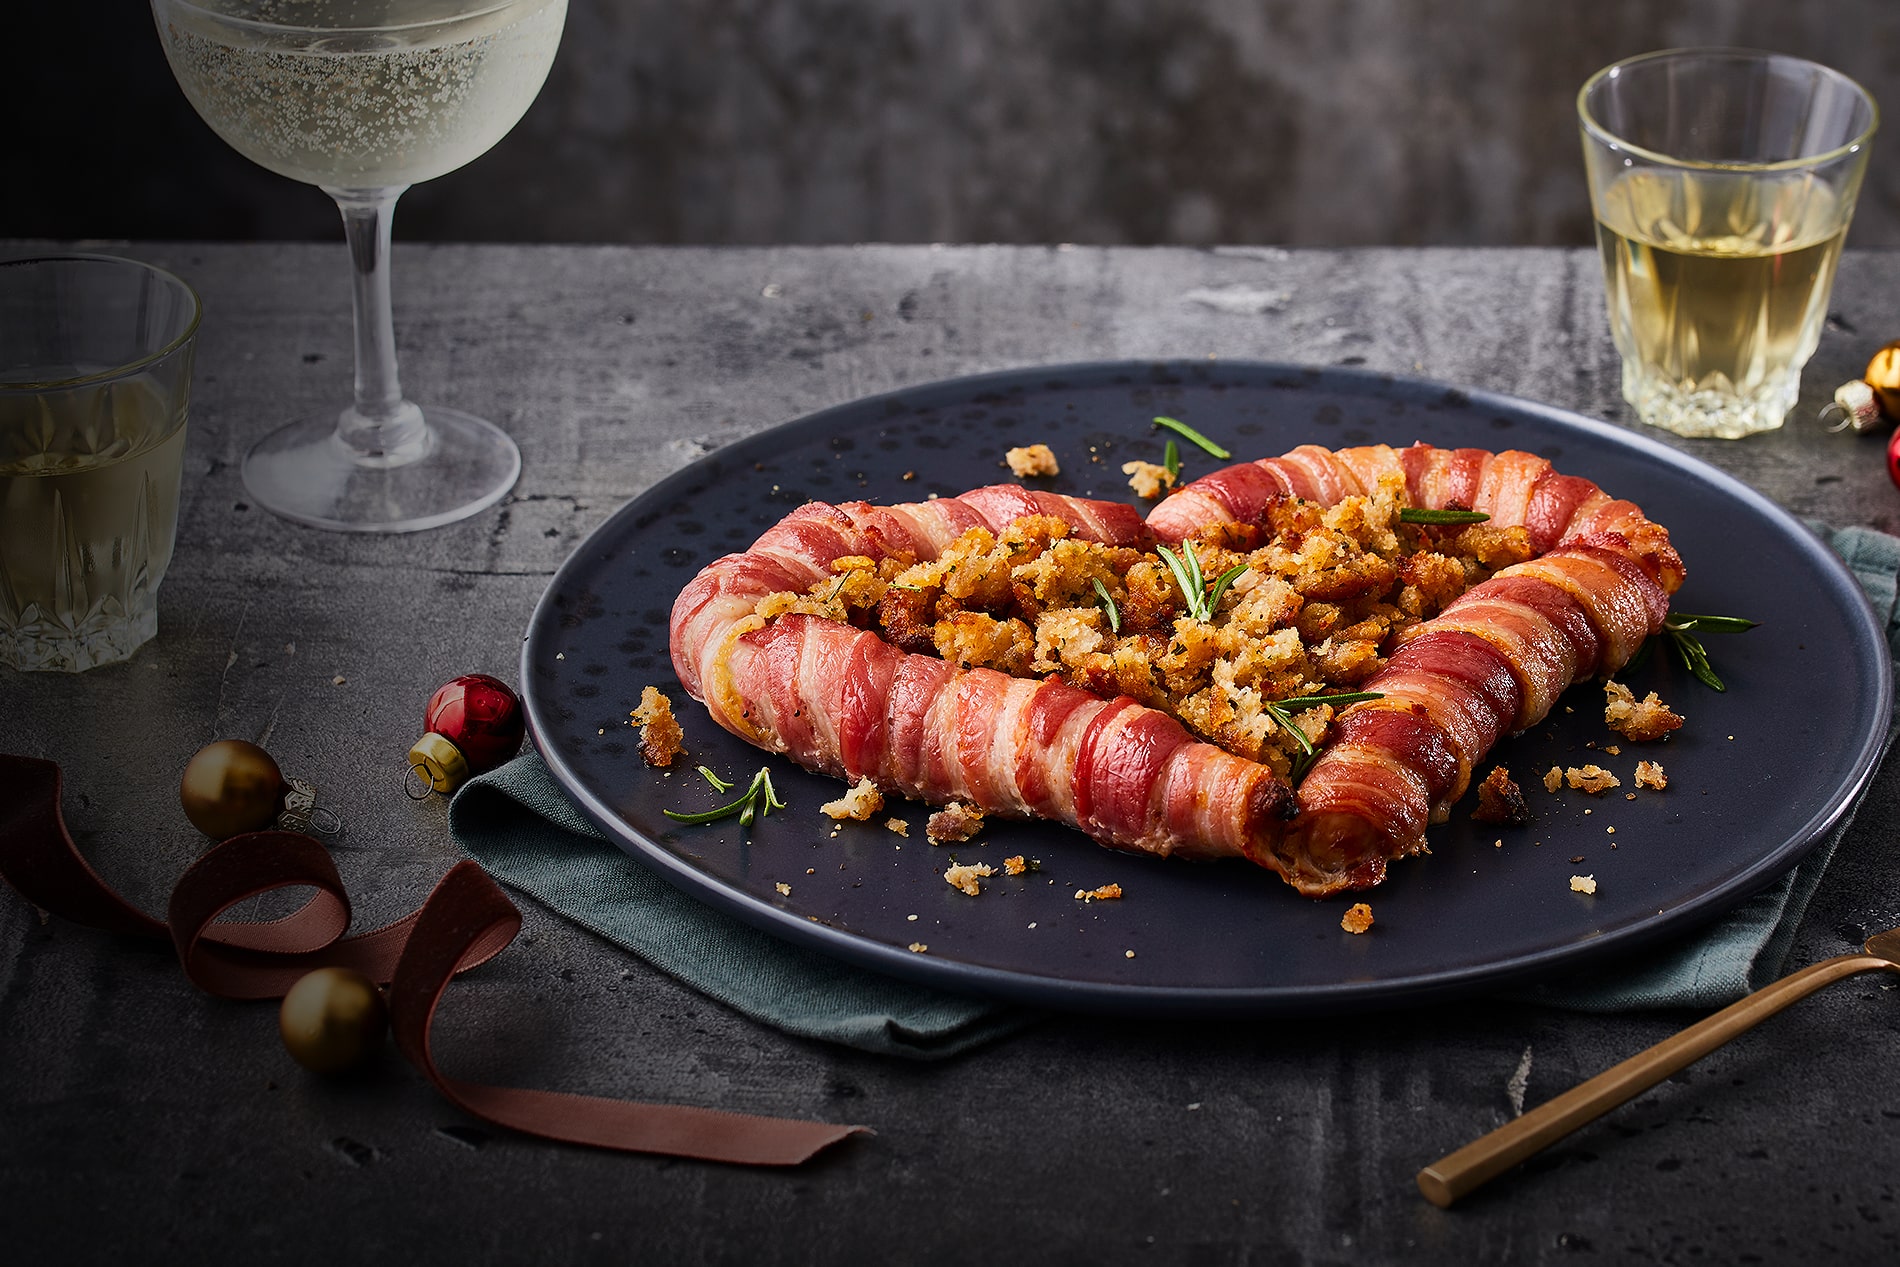 Discover: Pigs in Blankets Heart